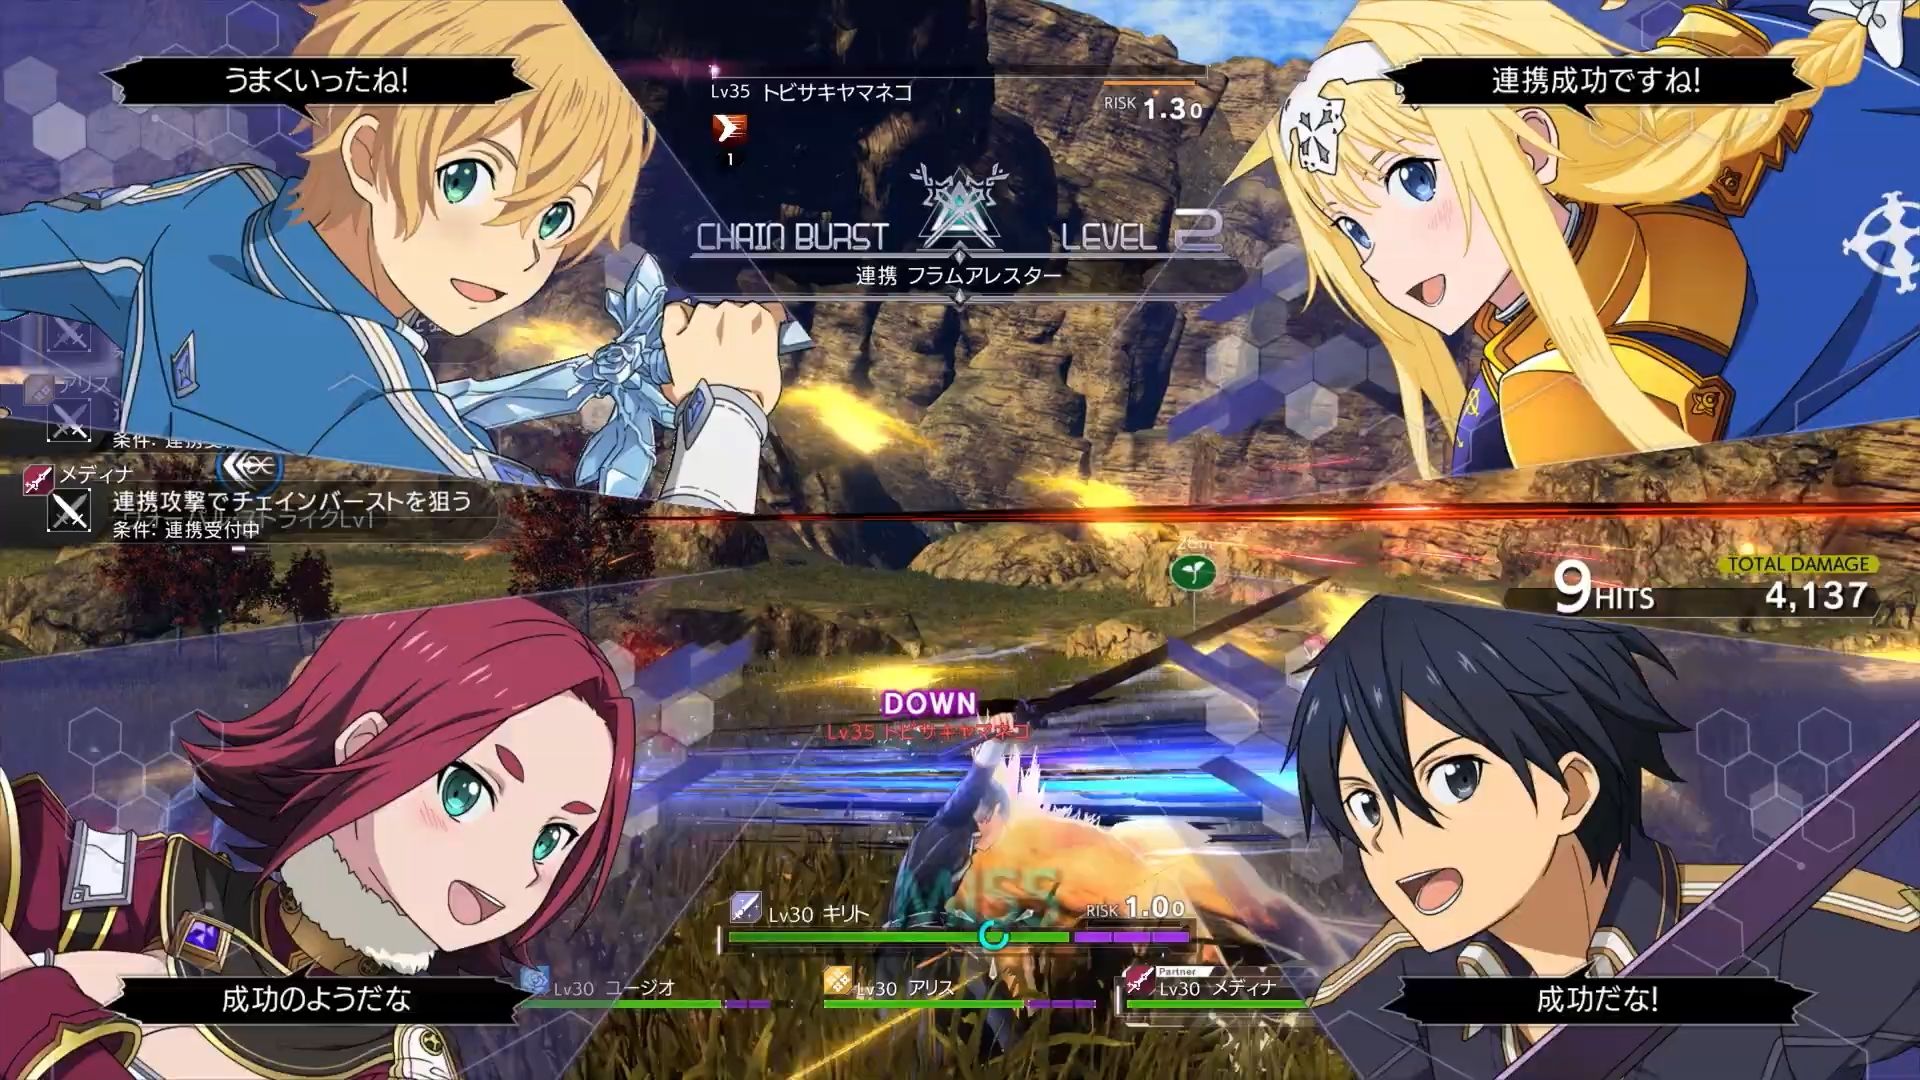 Every Sword Art Online Game Explained